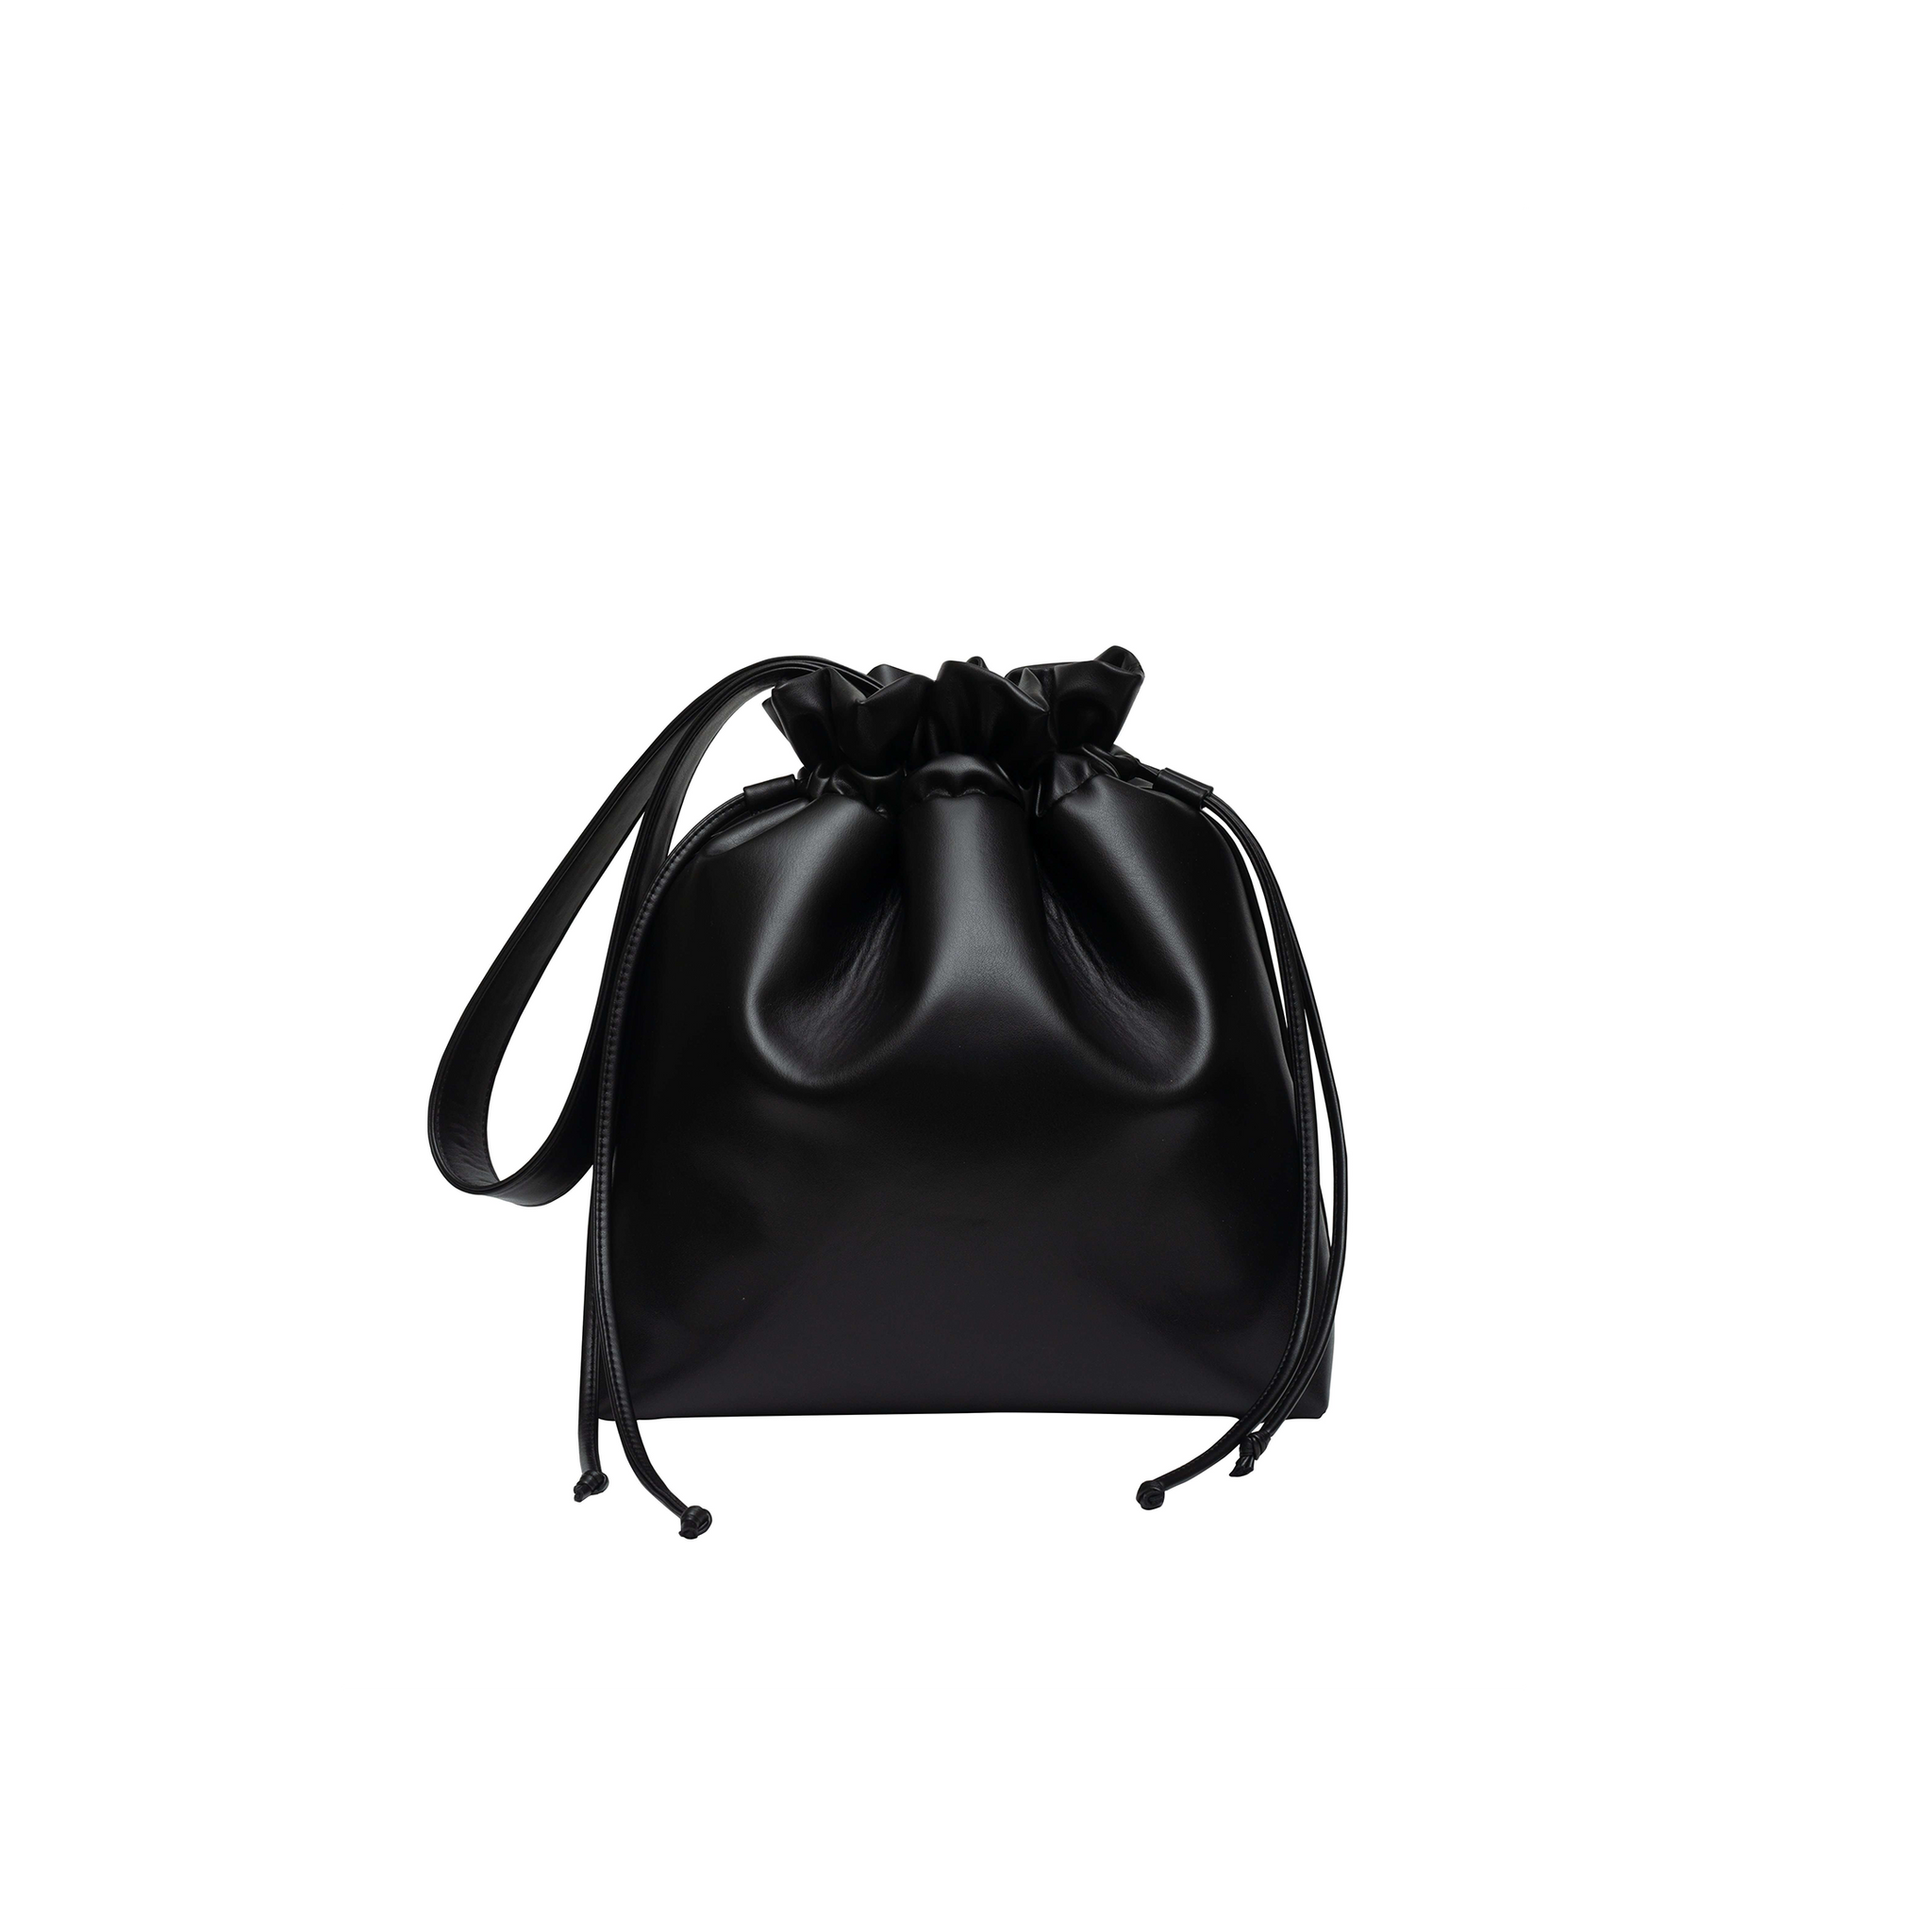 Large vegan leather shoulder tote in black with black strap and string closure.